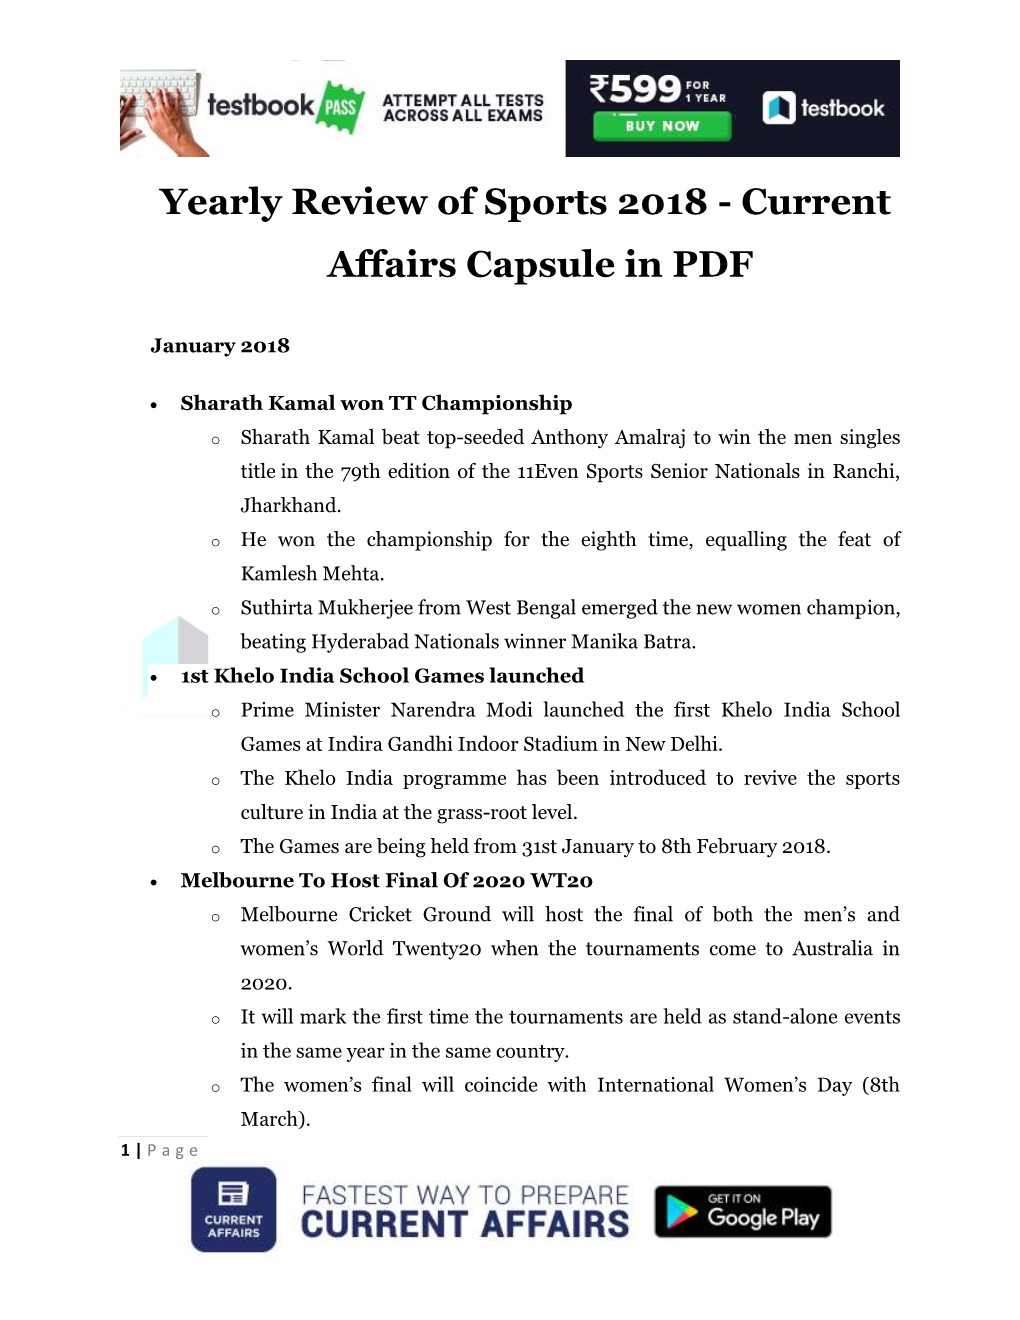 Yearly Review of Sports 2018 - Current Affairs Capsule in PDF